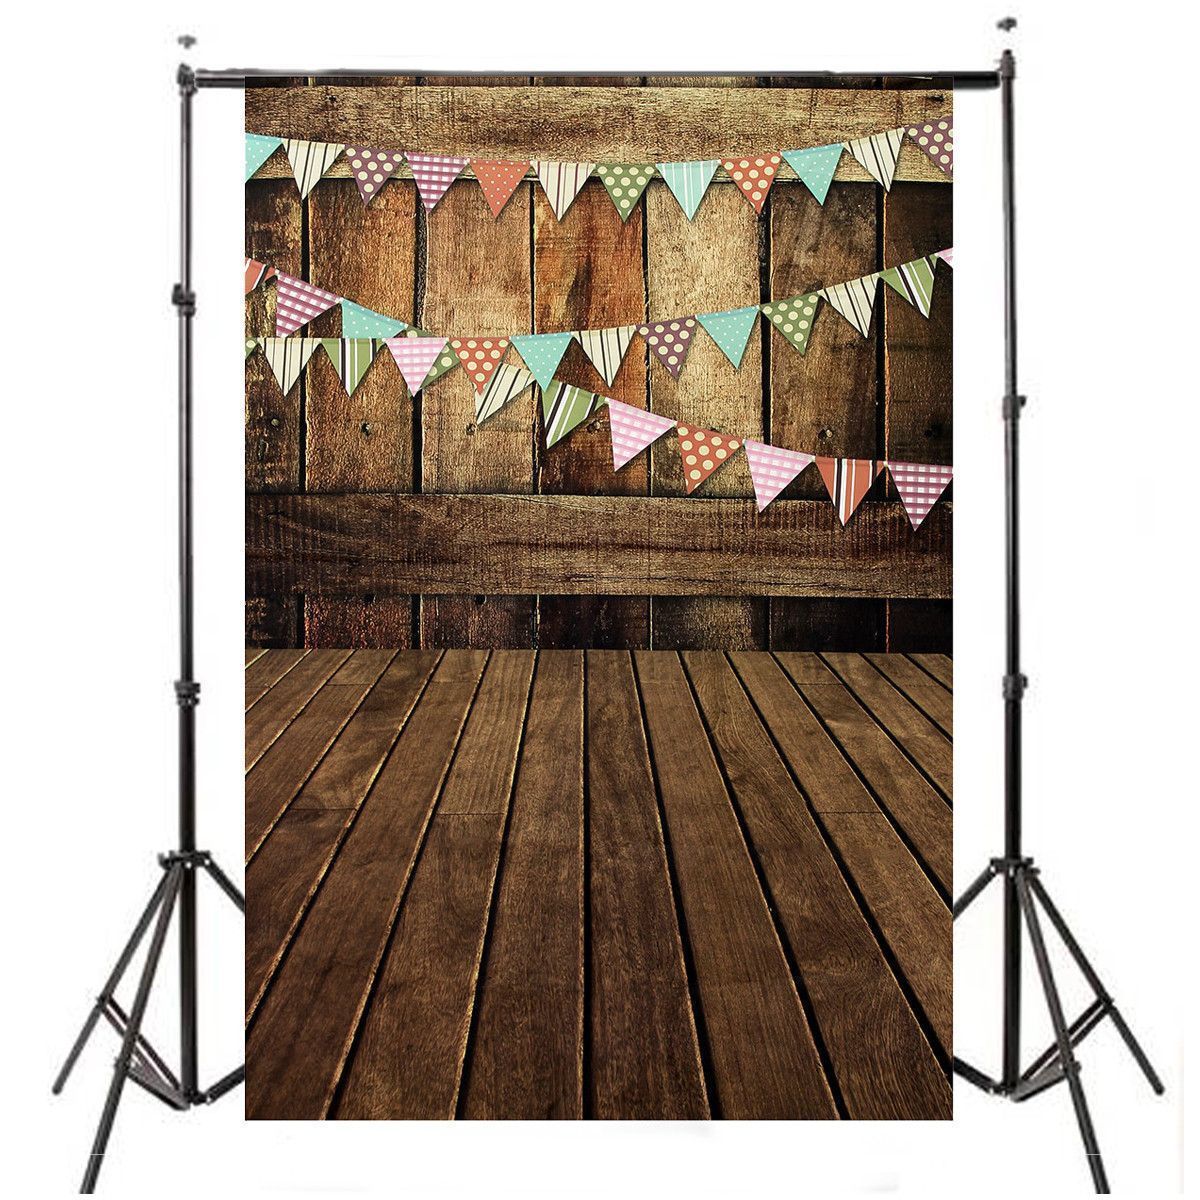 3x5FT-Wooden-Wall-Backdrop-Photography-Prop-Photo-Background-1681585